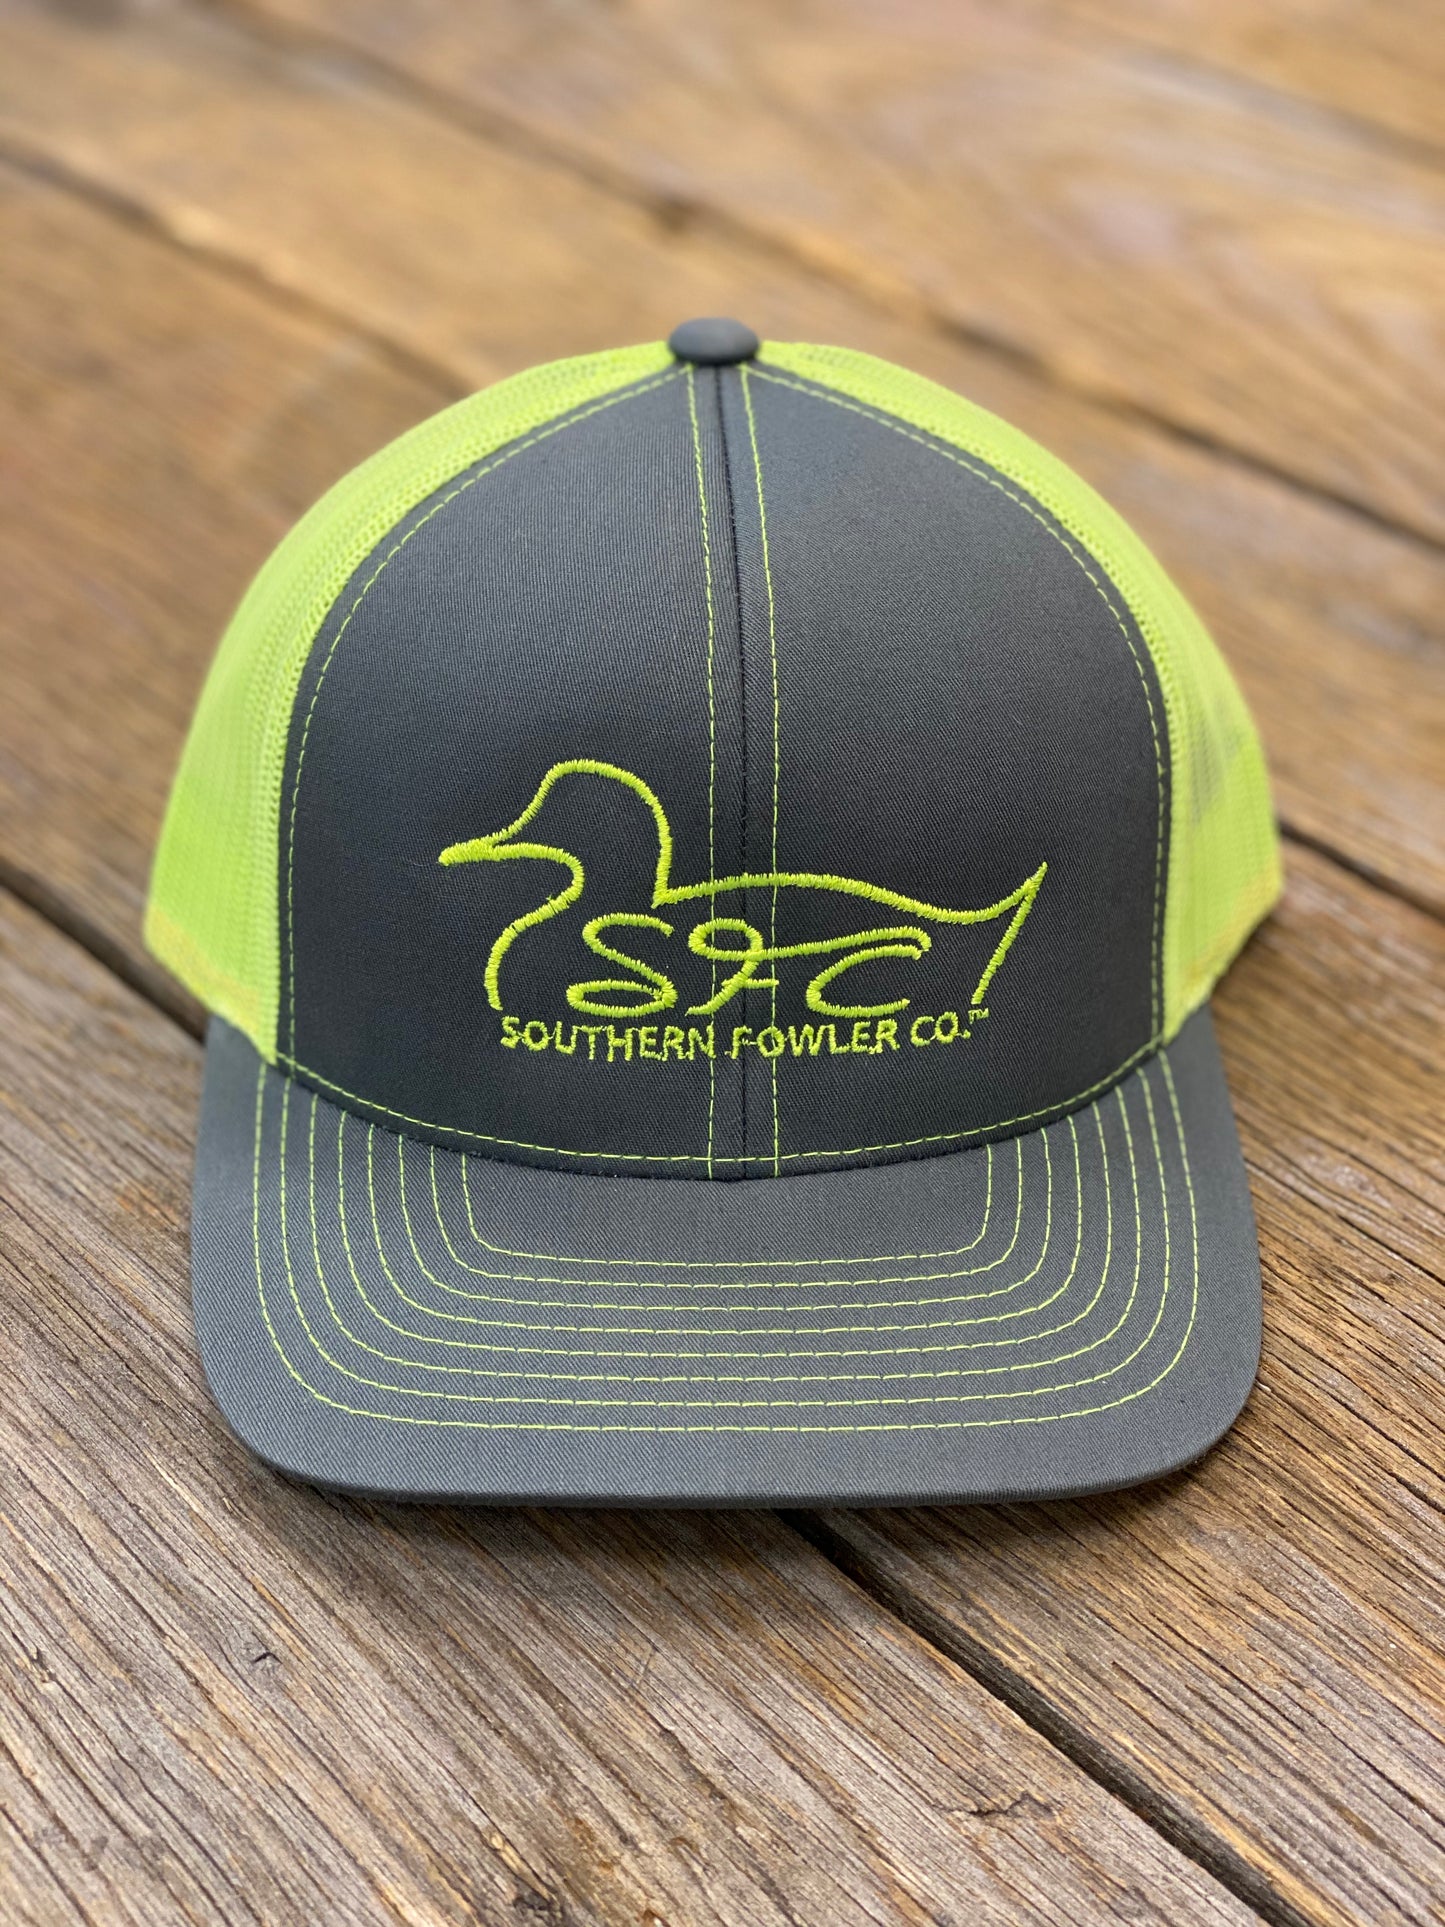 Southern Fowler Hat - Grey and Neon Yellow